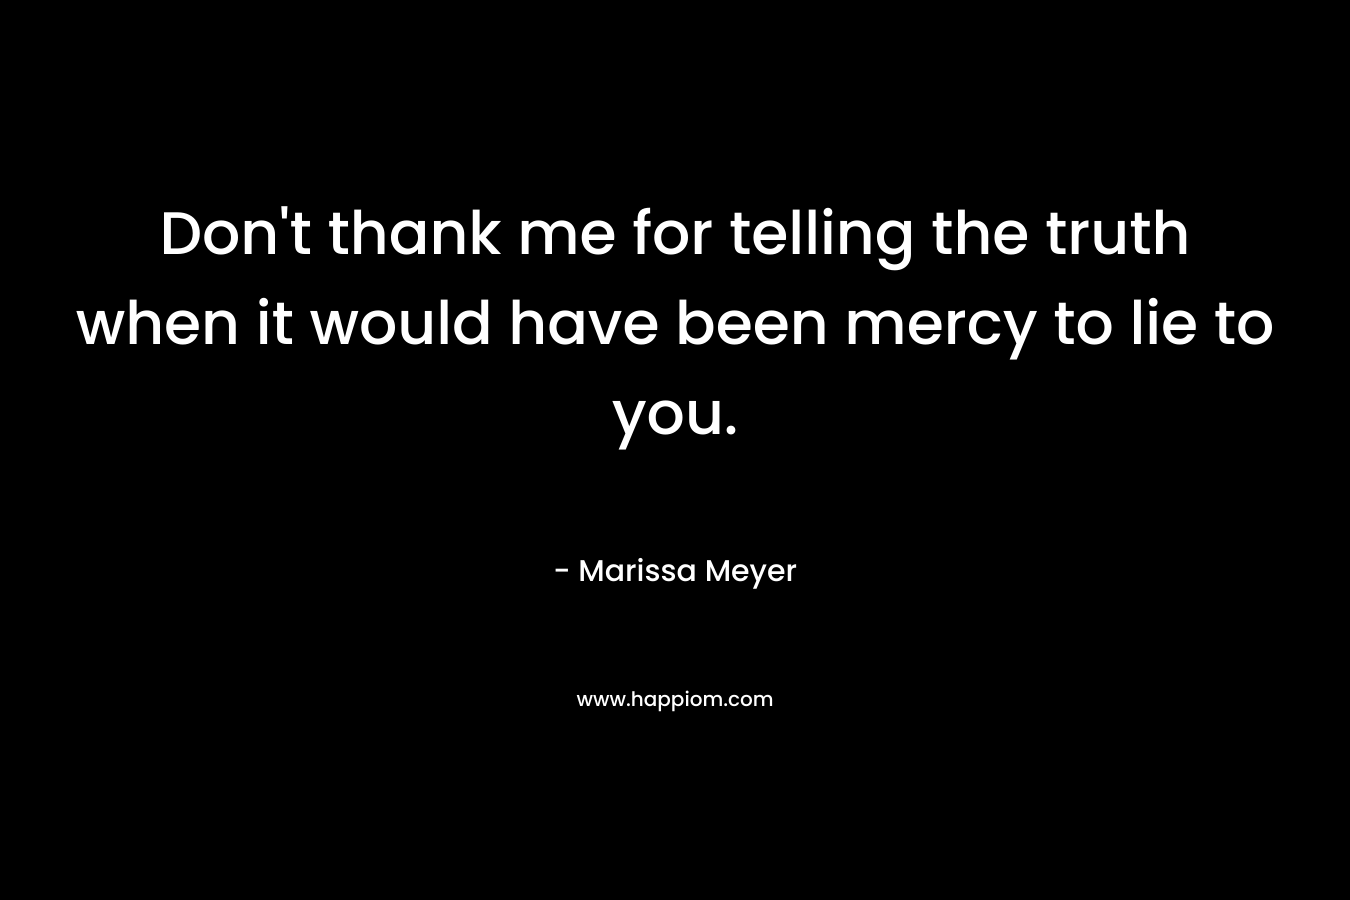 Don't thank me for telling the truth when it would have been mercy to lie to you.